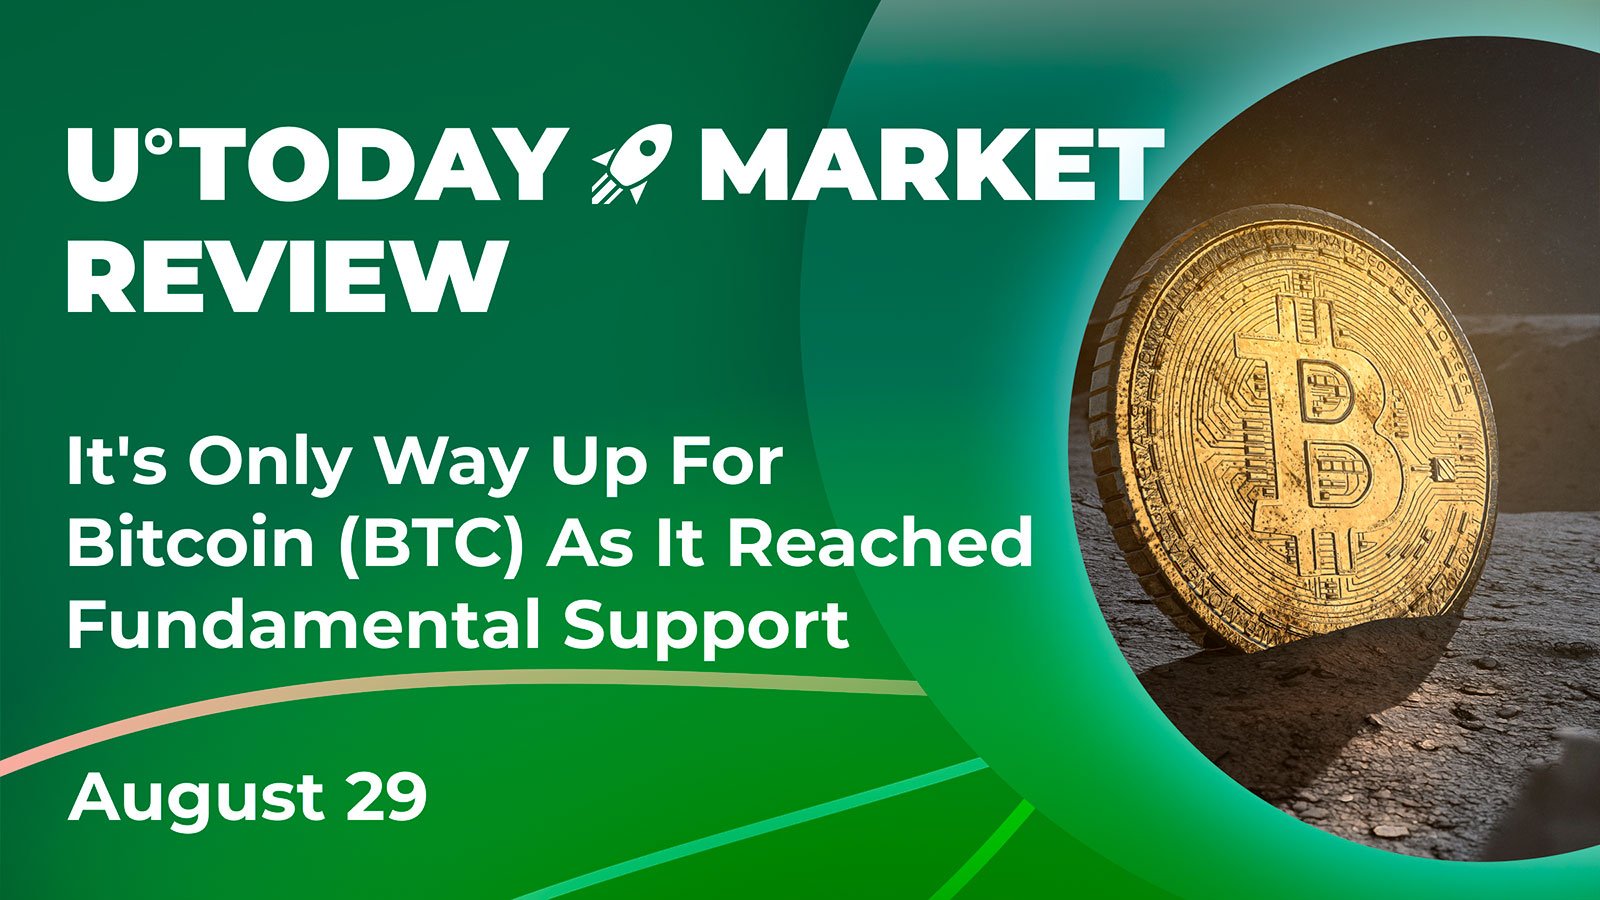 It’s Only up for Bitcoin (BTC) as It Reached Fundamental Support: Crypto Market Review, August 29